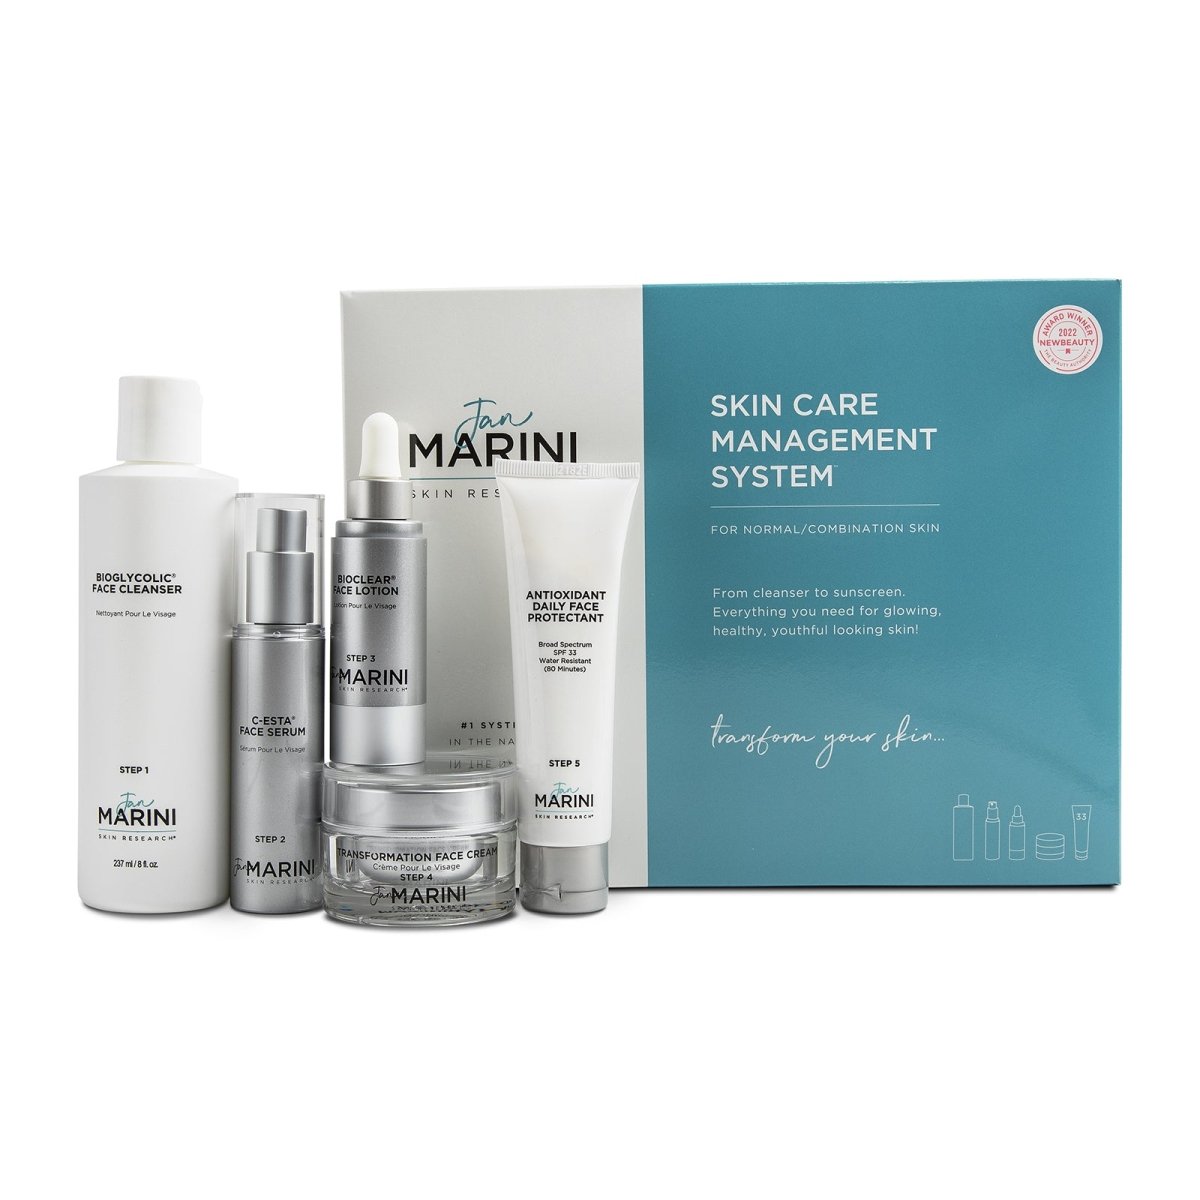 Jan Marini Skin Care Management System - Daily Face Protectant SPF 33 Normal/Combination - SkincareEssentials